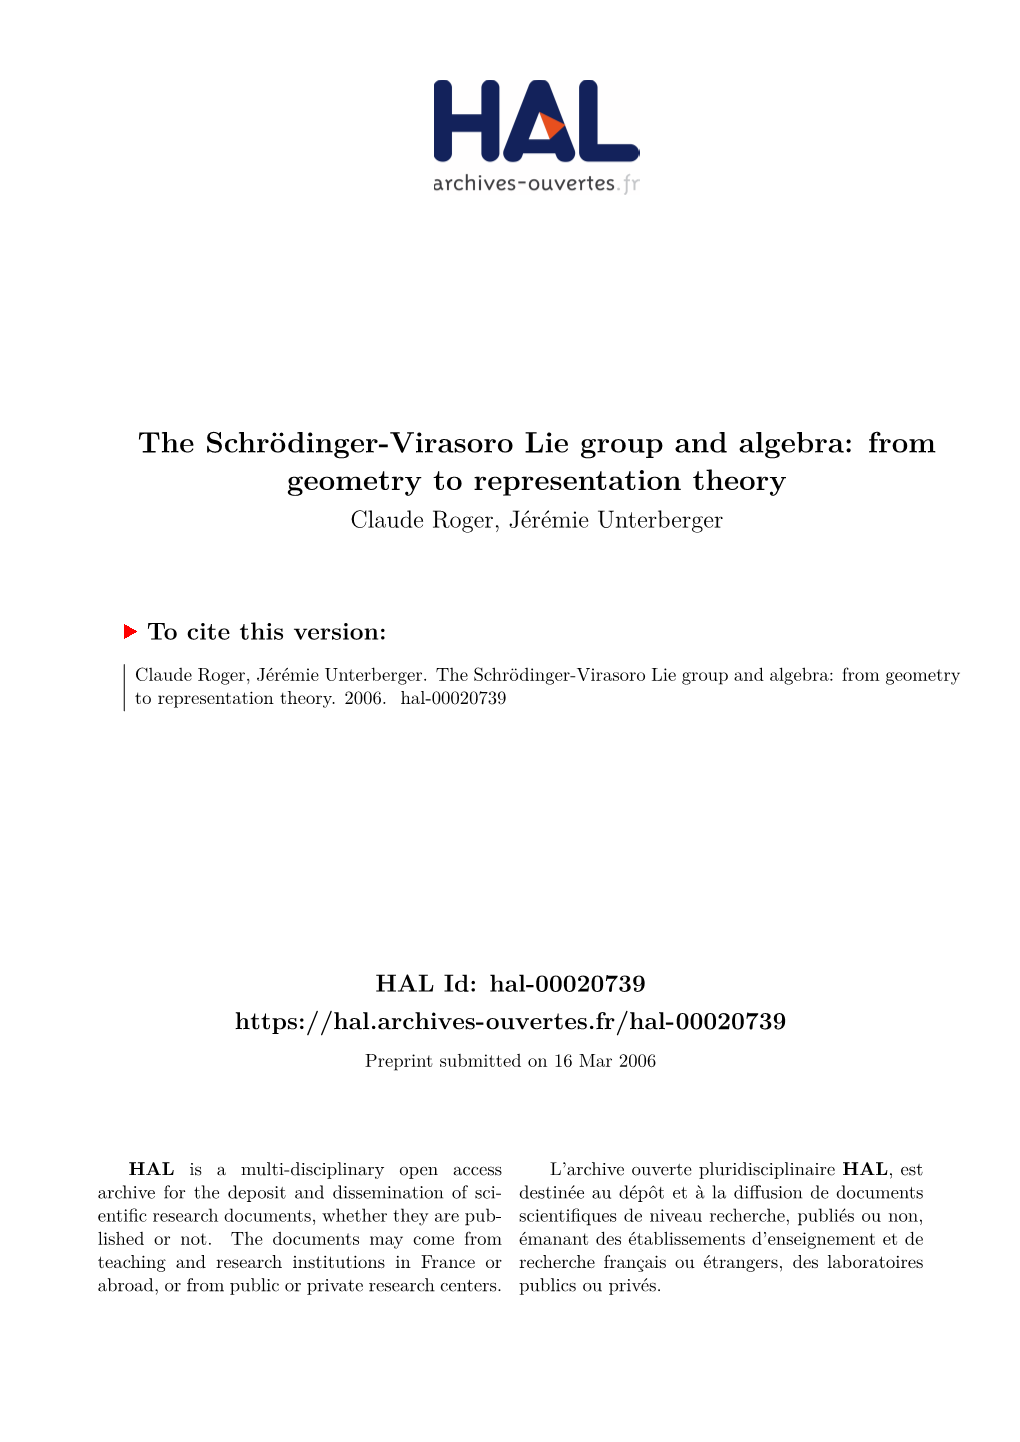 The Schrödinger-Virasoro Lie Group and Algebra: from Geometry to Representation Theory Claude Roger, Jérémie Unterberger